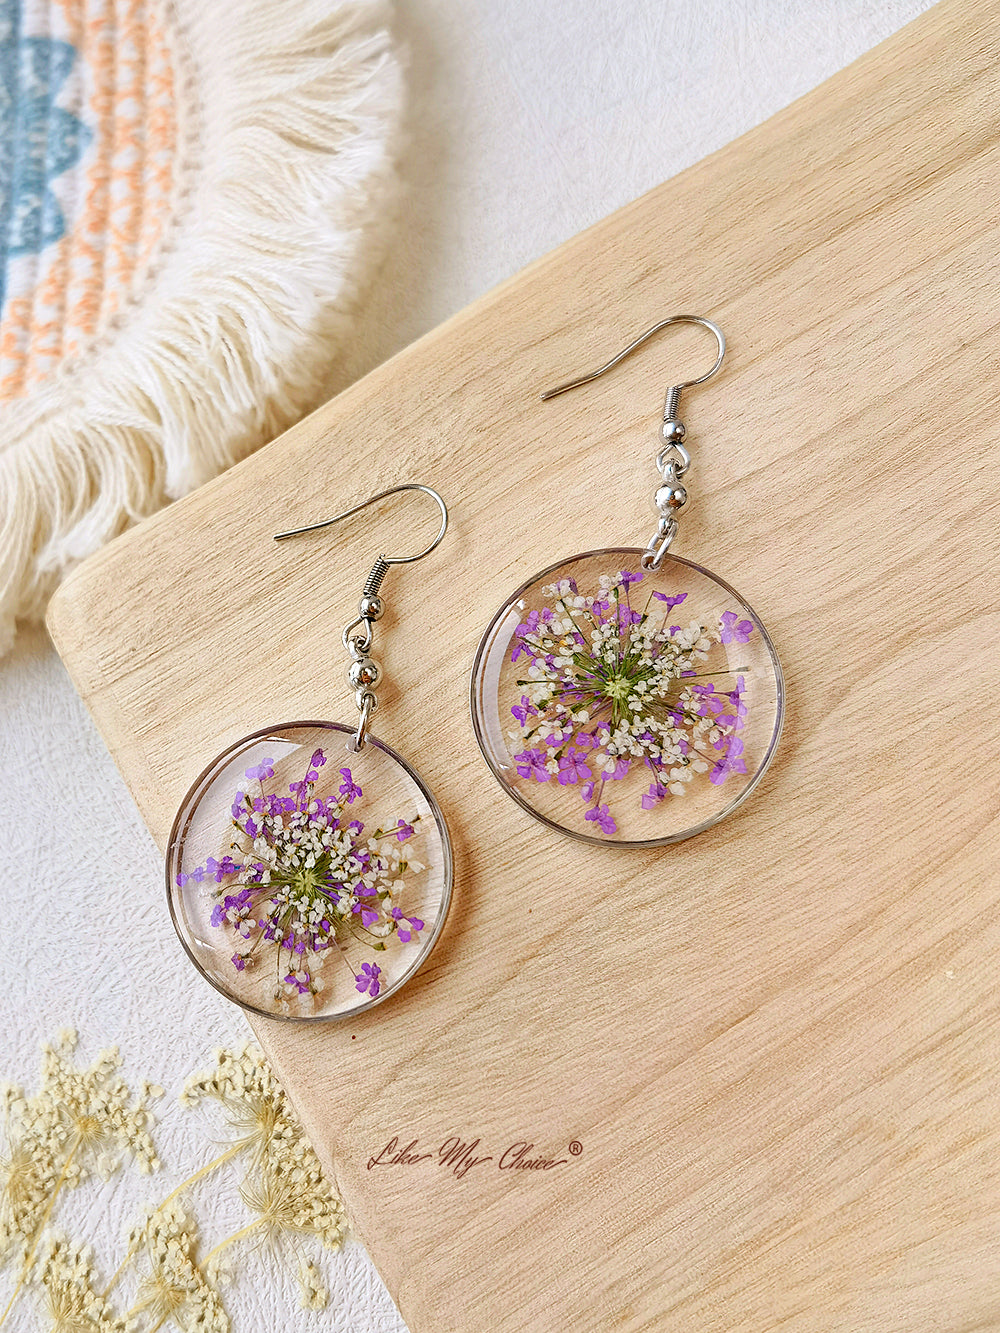 Forget Me Not Queen Anne Lace Resin Pressed Flower Earrings